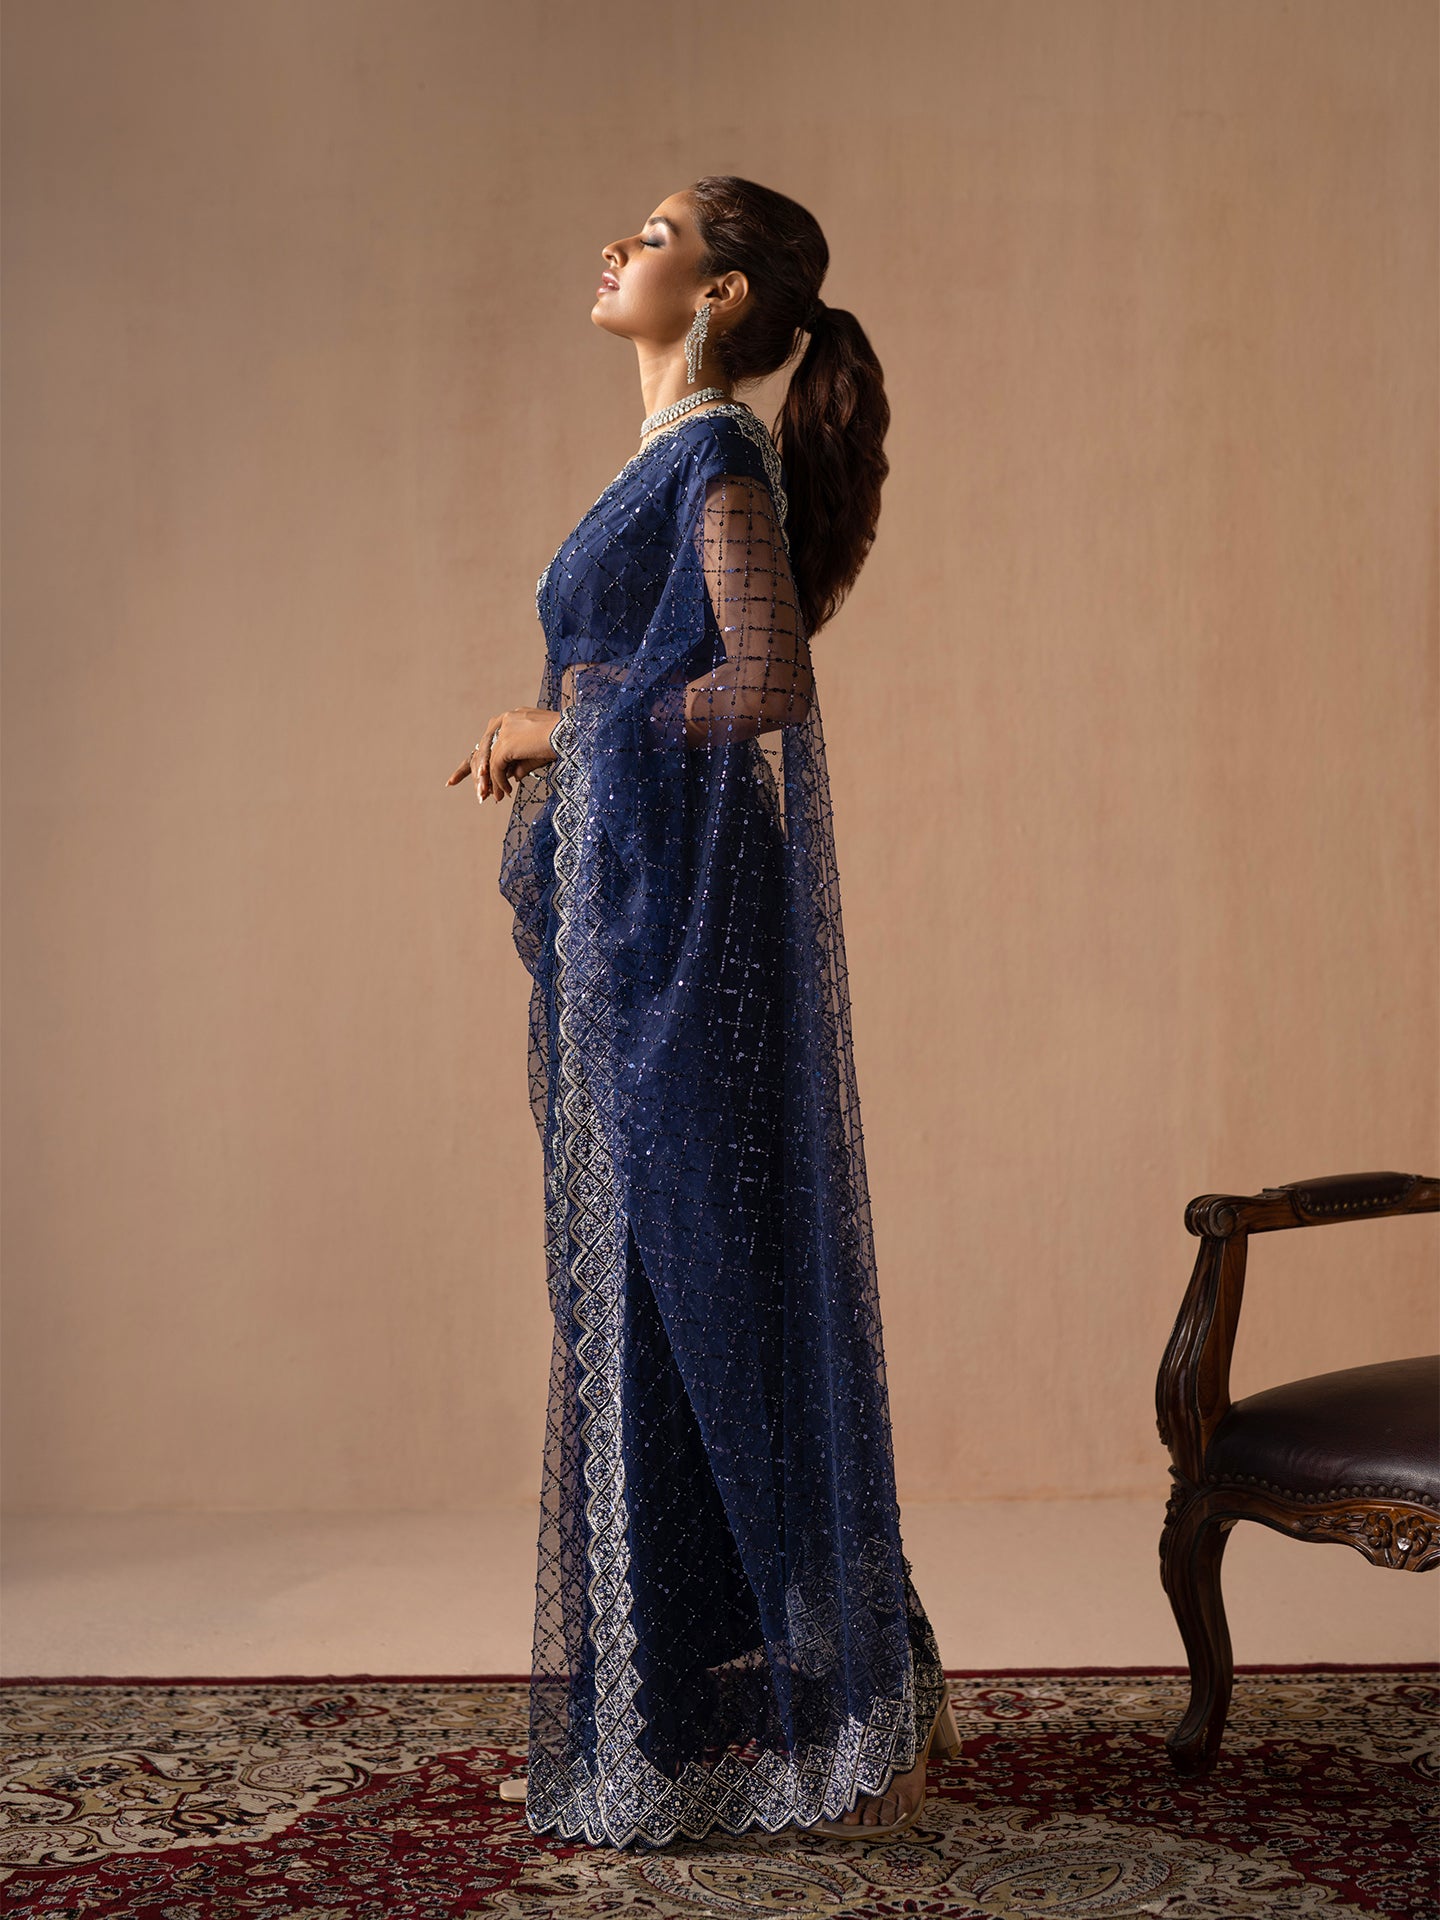 Classic Navy blue saree in net with kardana & sequin work – Malhotra's  Indian Heritage